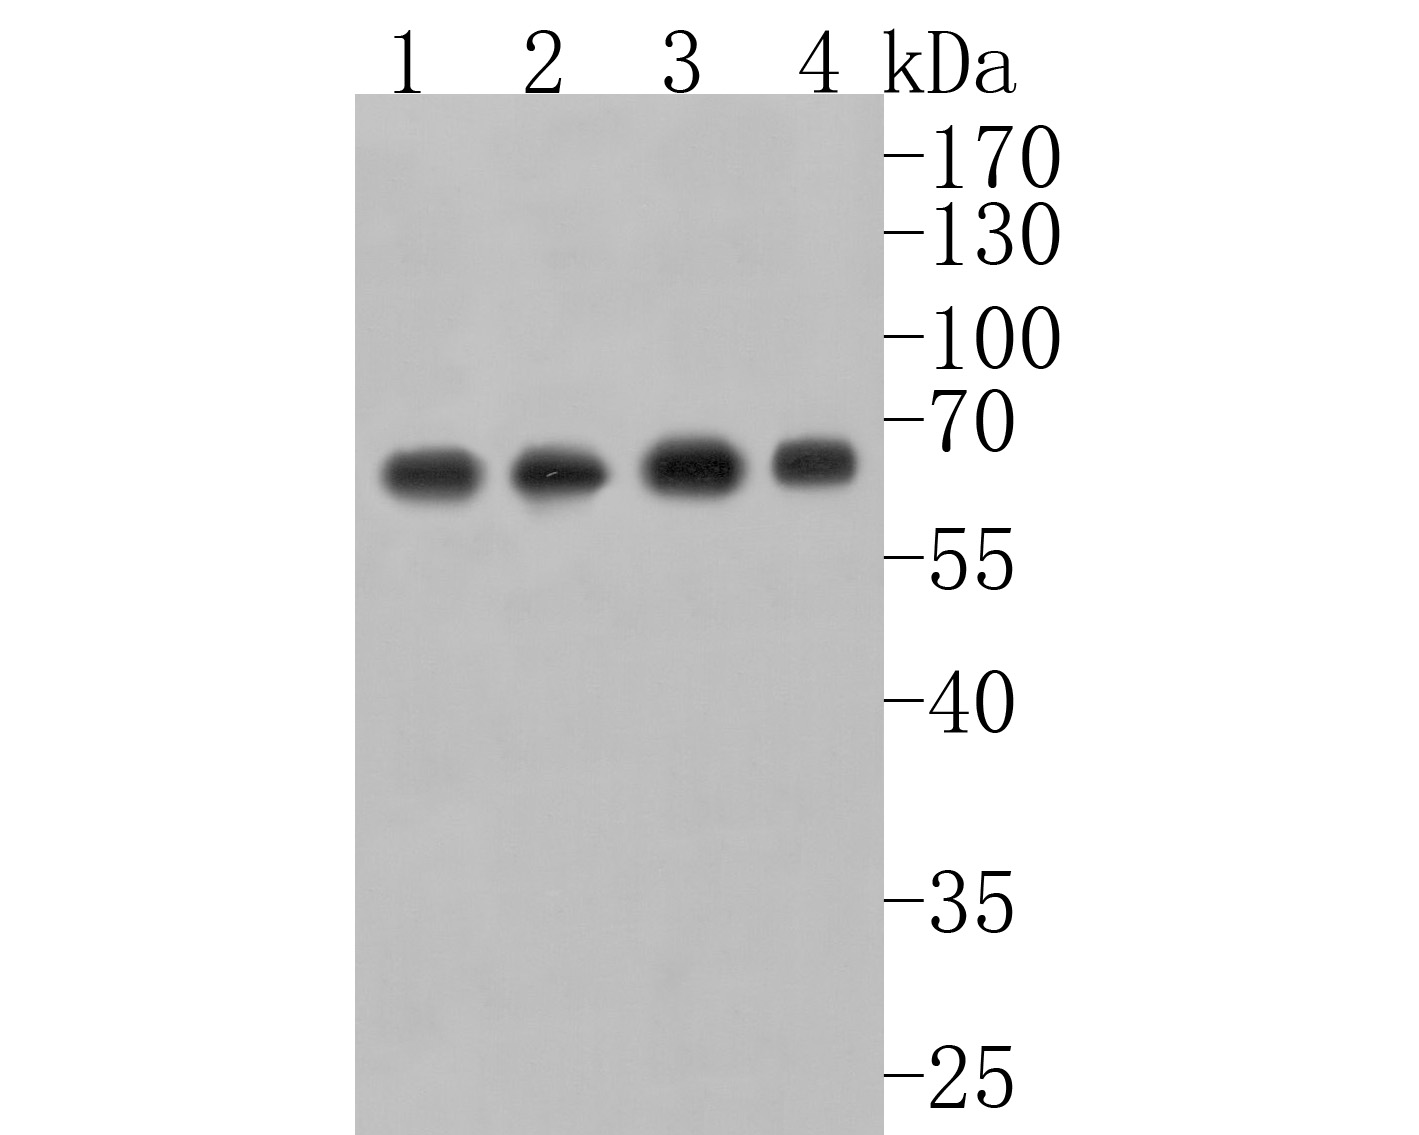 Western blot analysis of USP39 on different lysates. Proteins were transferred to a PVDF membrane and blocked with 5% BSA in PBS for 1 hour at room temperature. The primary antibody (HA720071, 1/500) was used in 5% BSA at room temperature for 2 hours. Goat Anti-Rabbit IgG - HRP Secondary Antibody (HA1001) at 1:200,000 dilution was used for 1 hour at room temperature.<br />
Positive control: <br />
Lane 1: Hela cell lysate<br />
Lane 2: 293T cell lysate<br />
Lane 3: Jurkat cell lysate<br />
Lane 4: Mouse lung tissue lysate